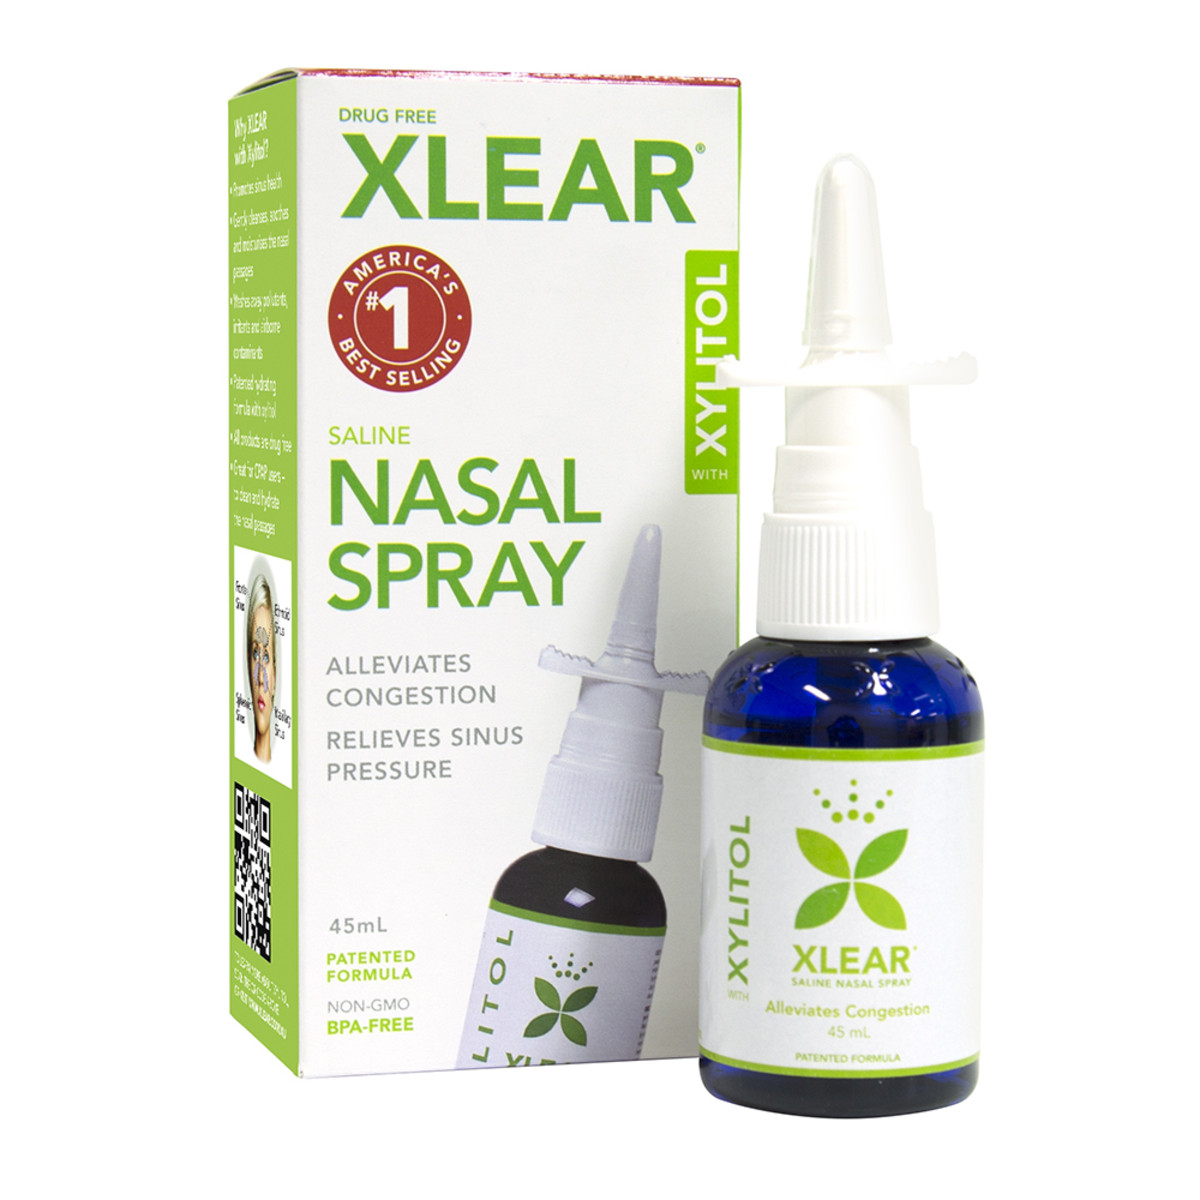 XLEAR - Nasal Sinus Care with Xylitol